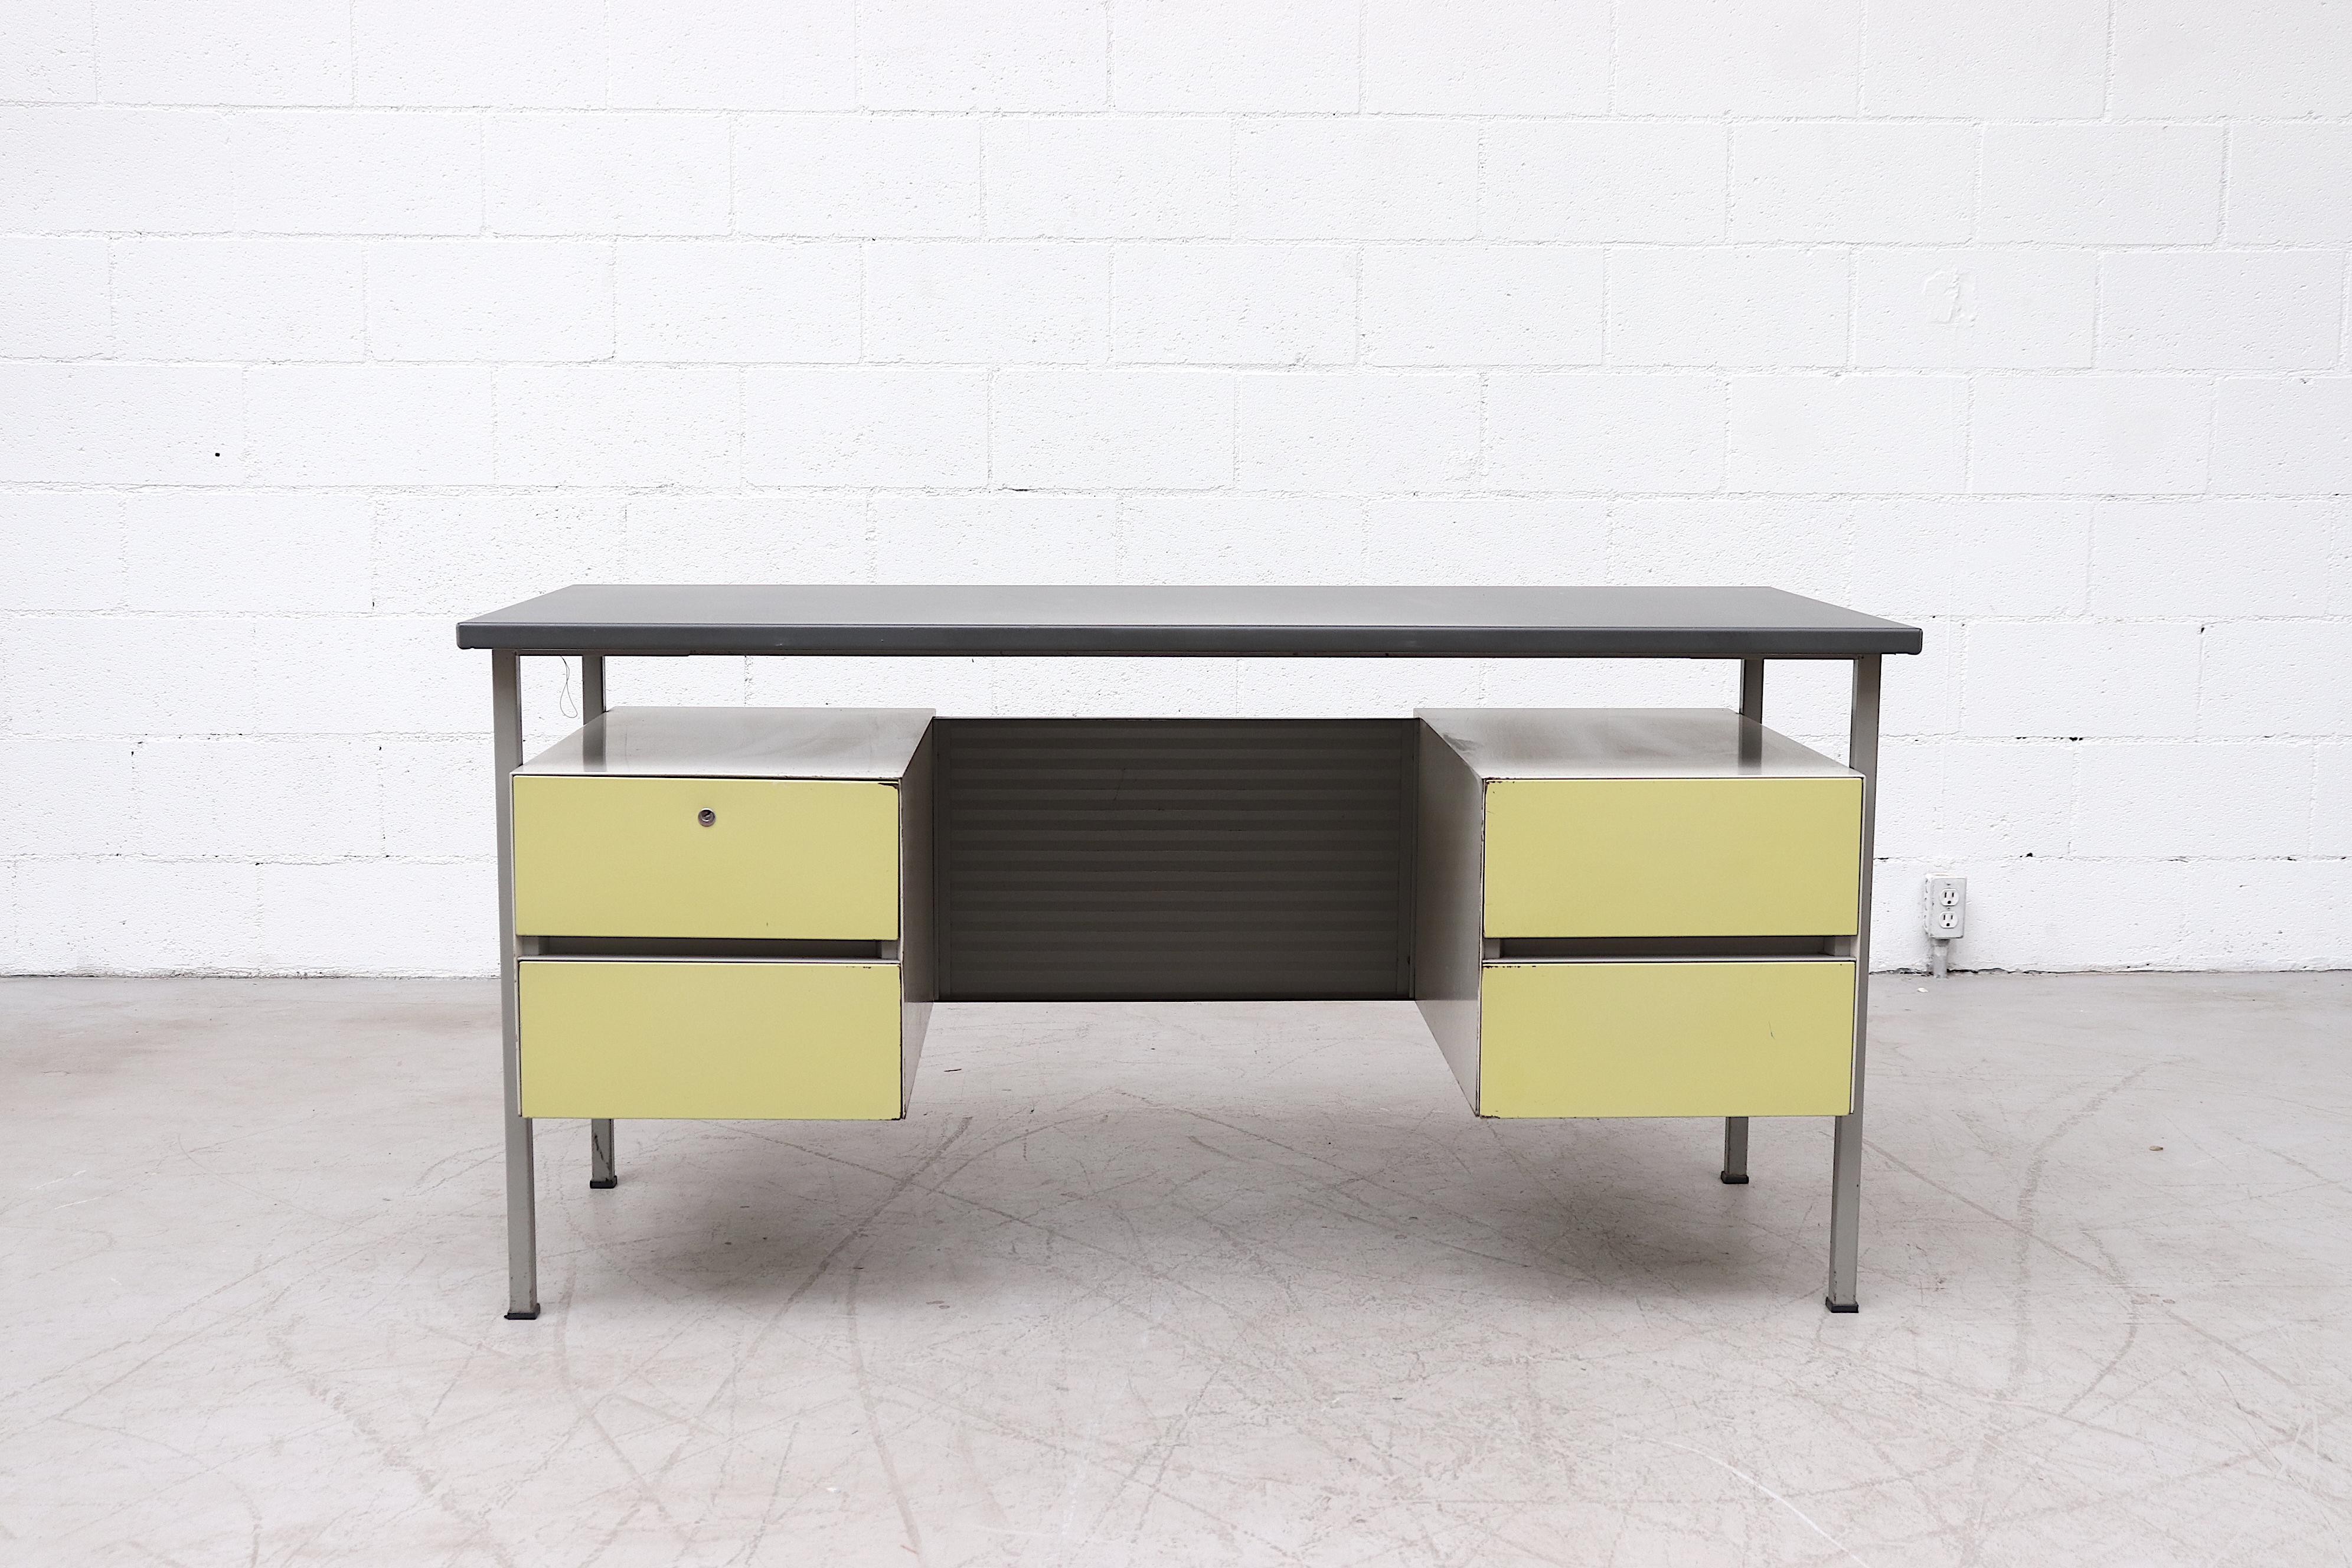 Gispen Industrial writing desk by A.R. Cordemeyer with double stacked chartreuse enameled drawers, a corrugated privacy screen and charcoal grey linoleum top. In original condition with visible wear and key. Wear is consistent with its age and usage.